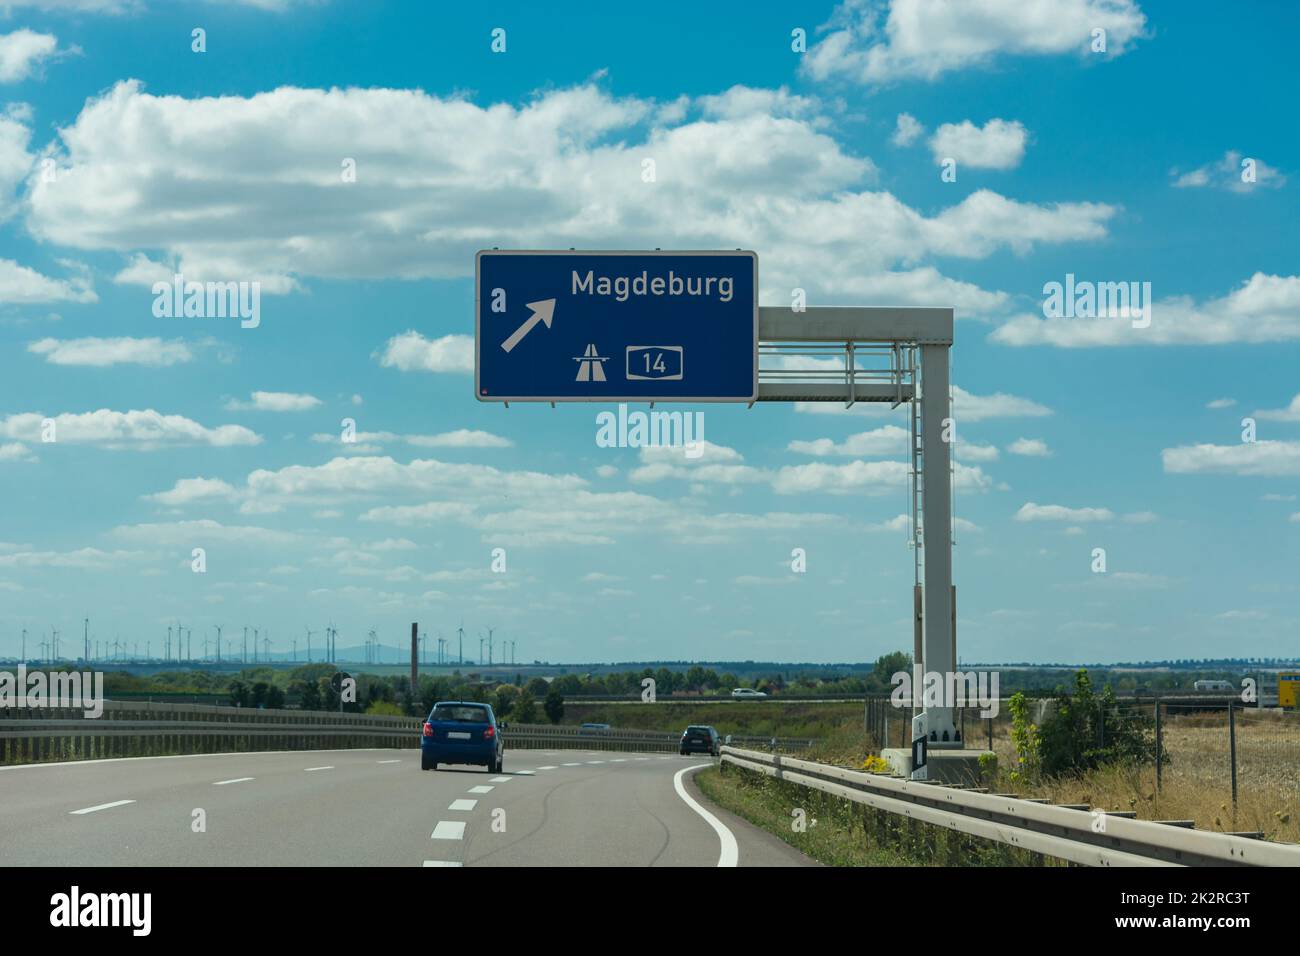 Germany motorway sign A14, exit Magdeburg Stock Photo